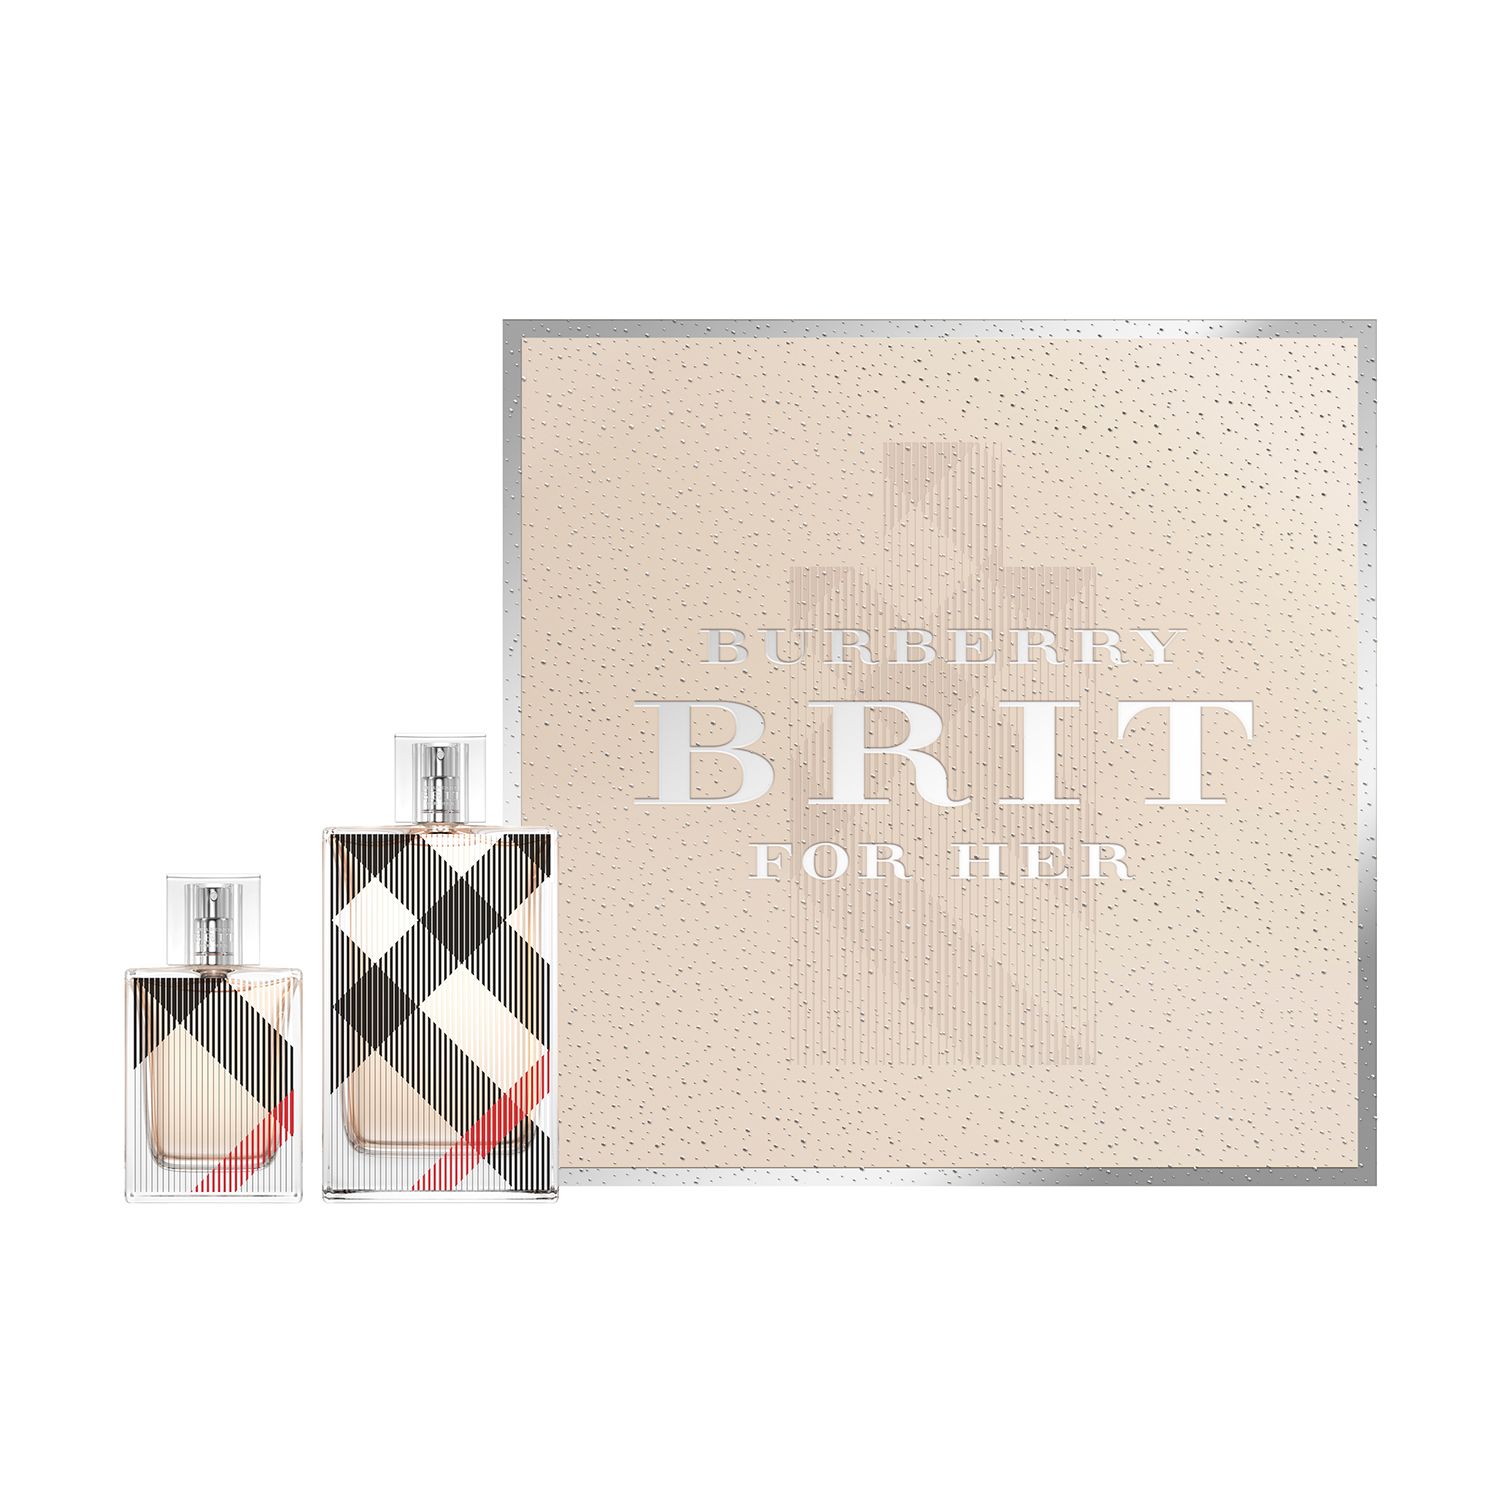 Burberry Brit for Her Women's Perfume 2 